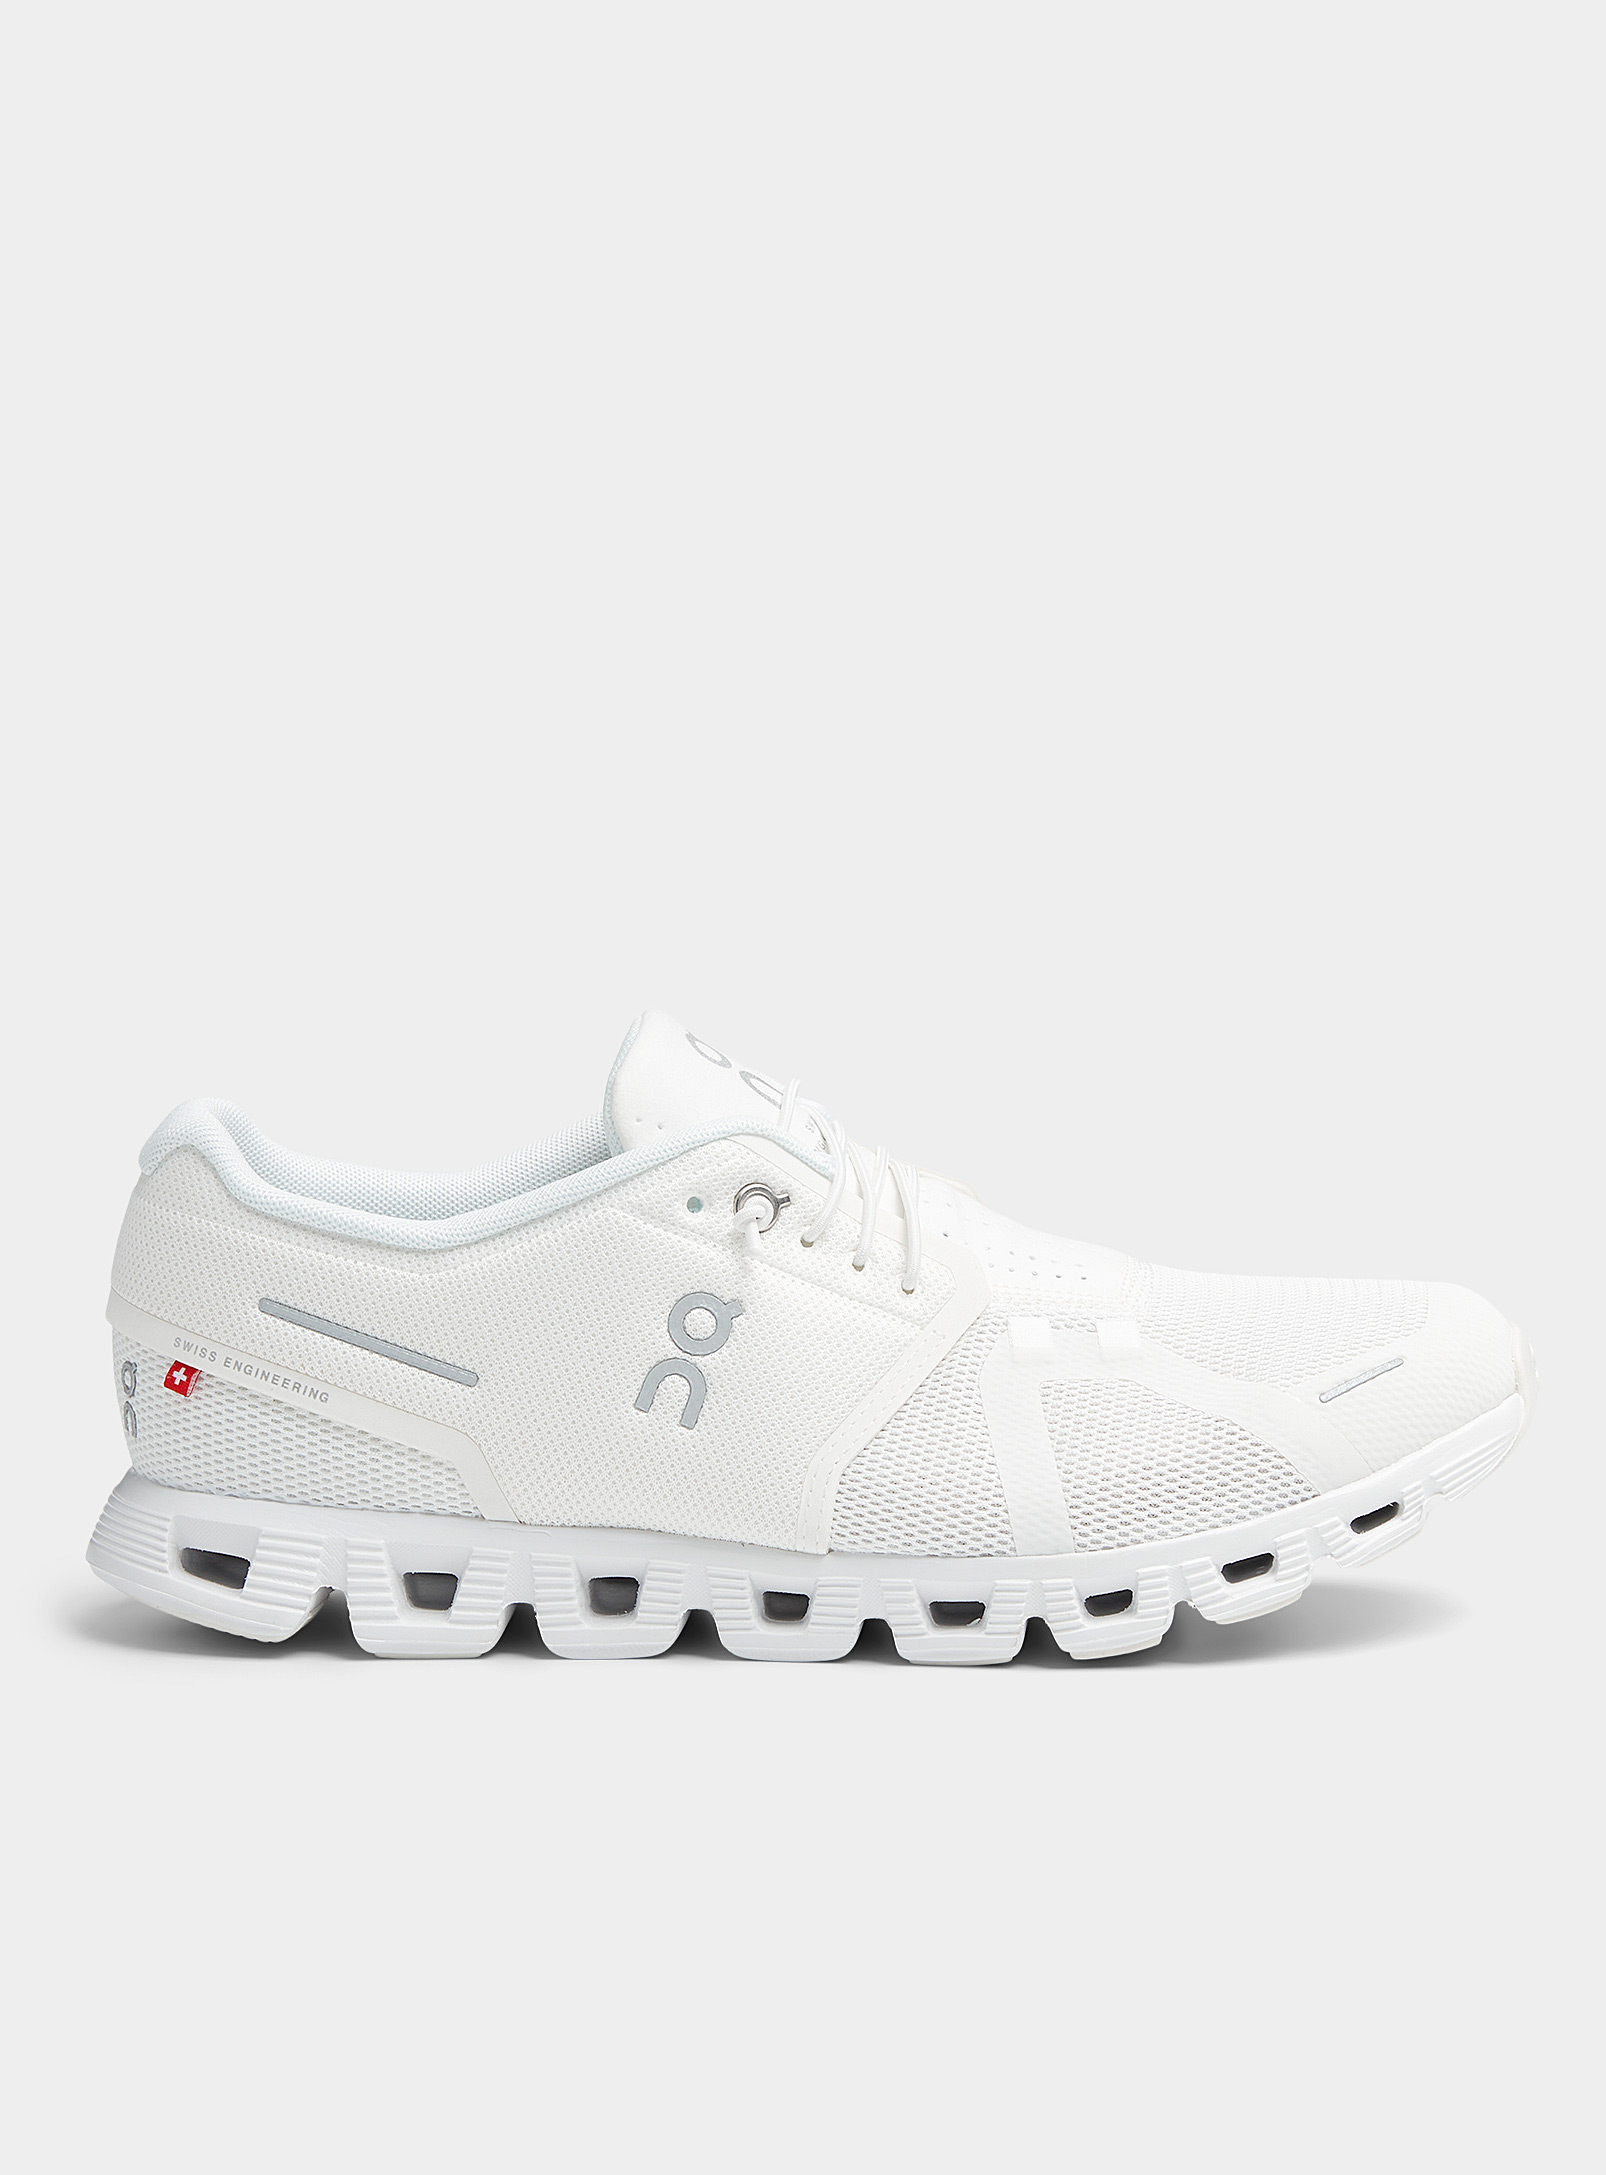 On All White Cloud 5 Sneakers Men